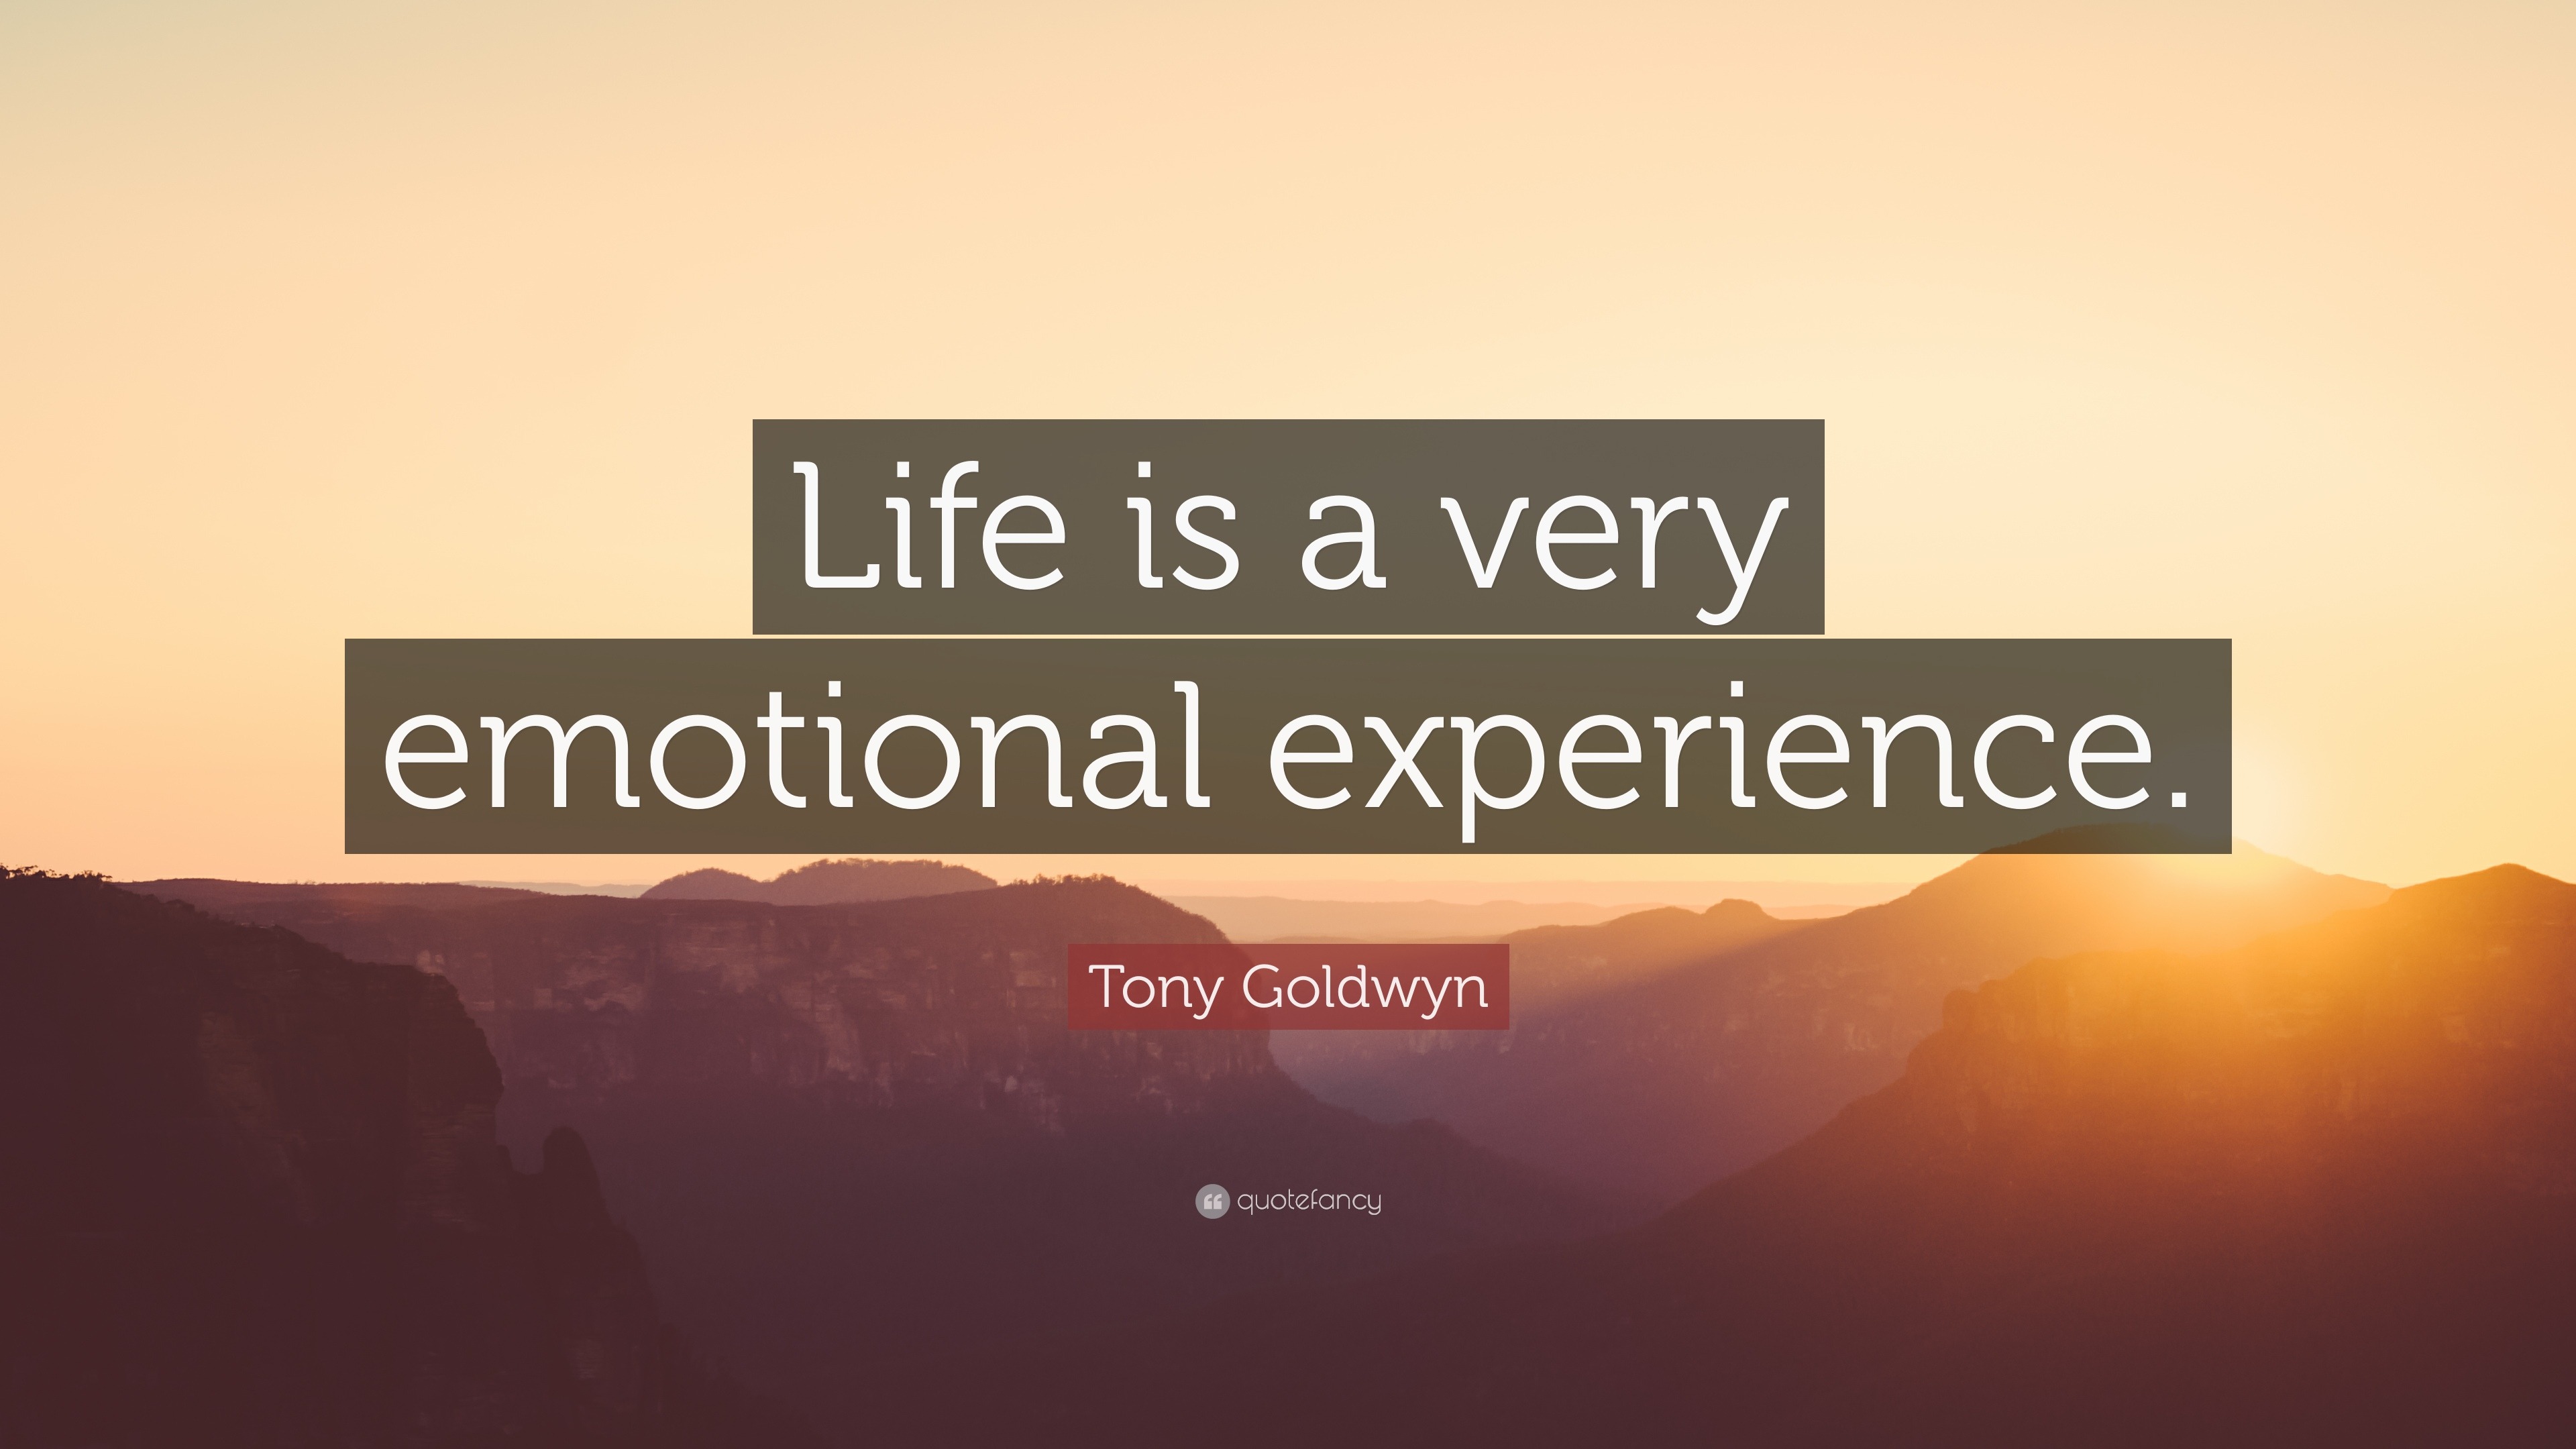 Tony Goldwyn Quote “Life is a very emotional experience ”